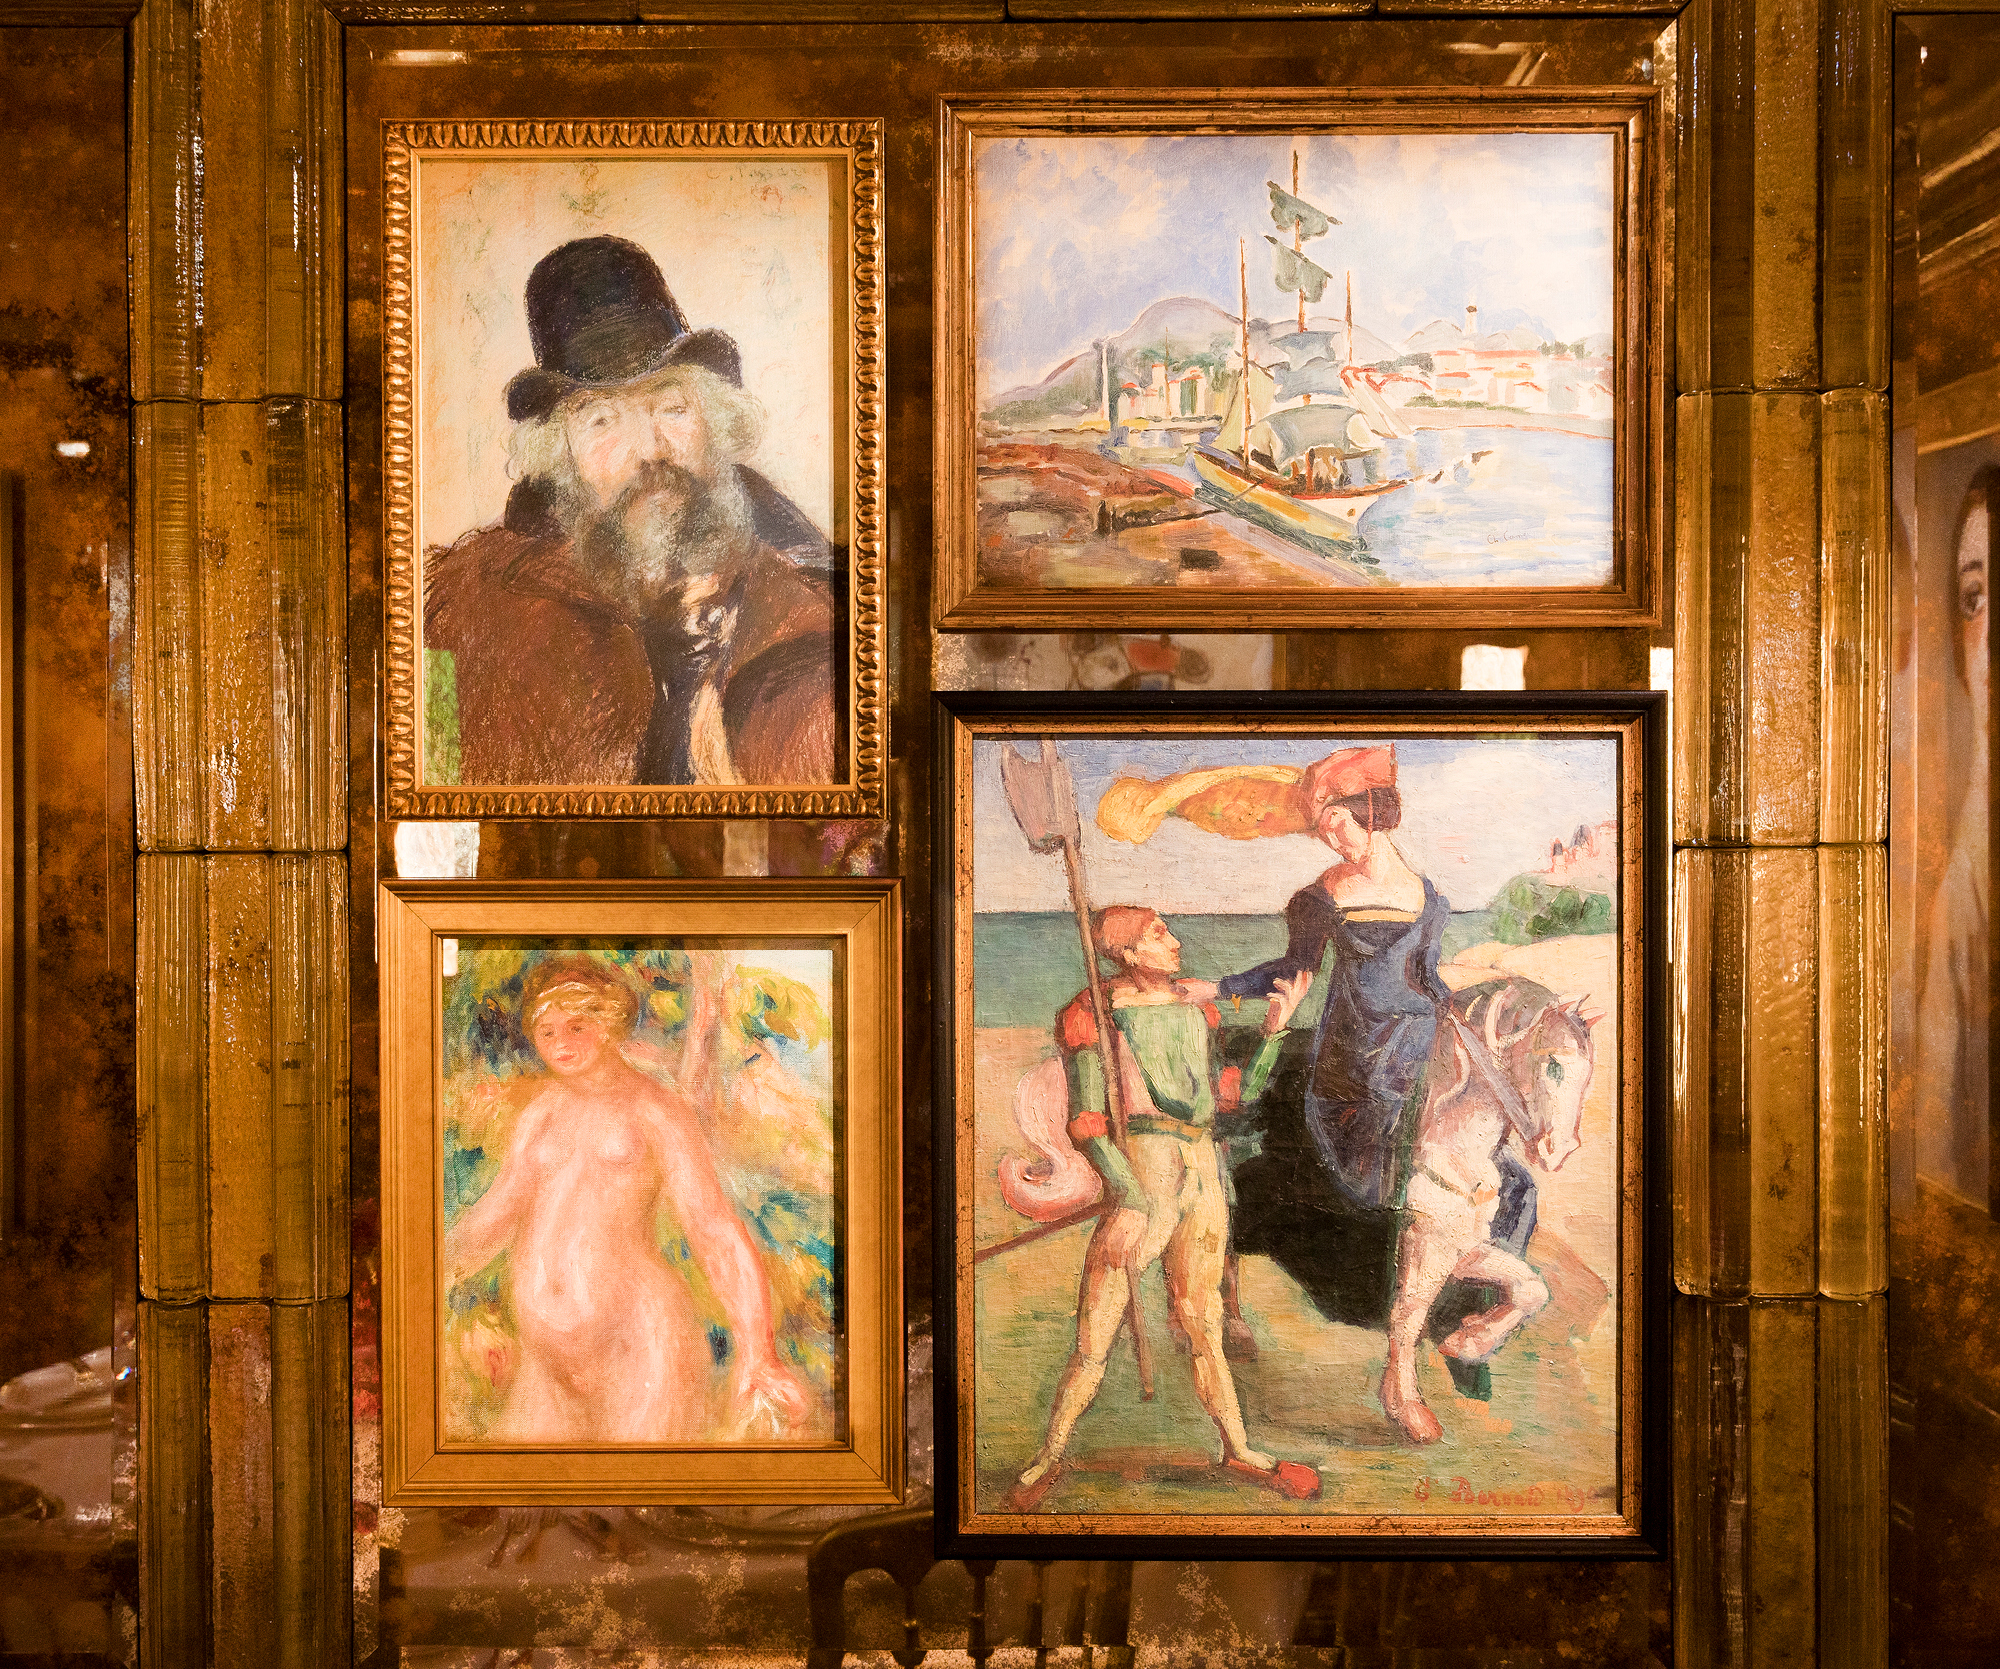 The room features artwork from Marc Chagall, Pierre-Auguste Renoir and Joan Miró